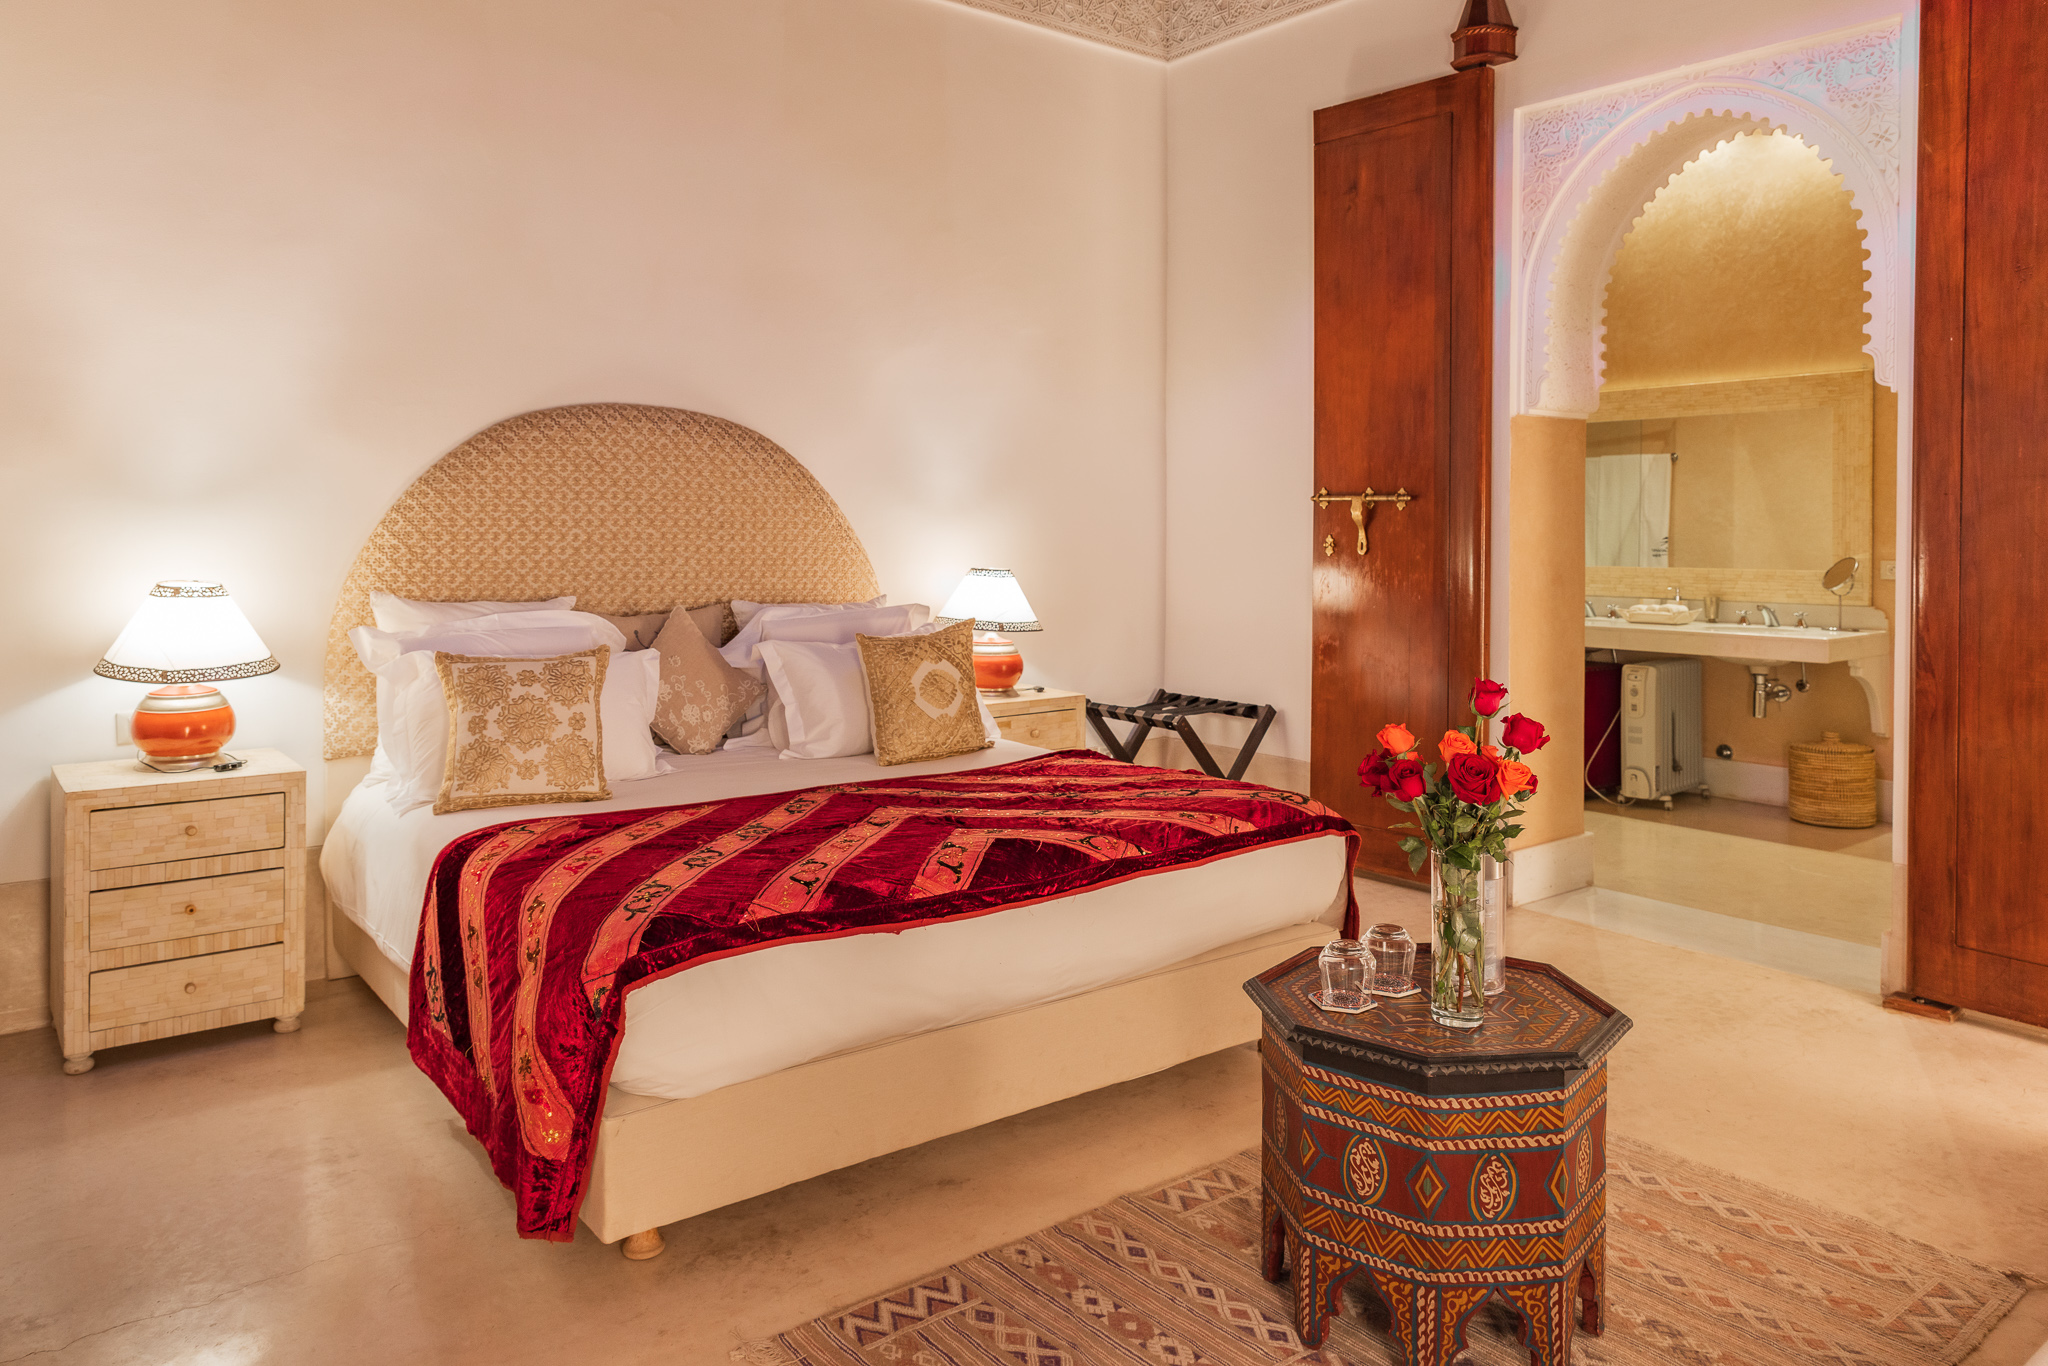 Riad Luciano - Moroccan suite - Rooms and suites